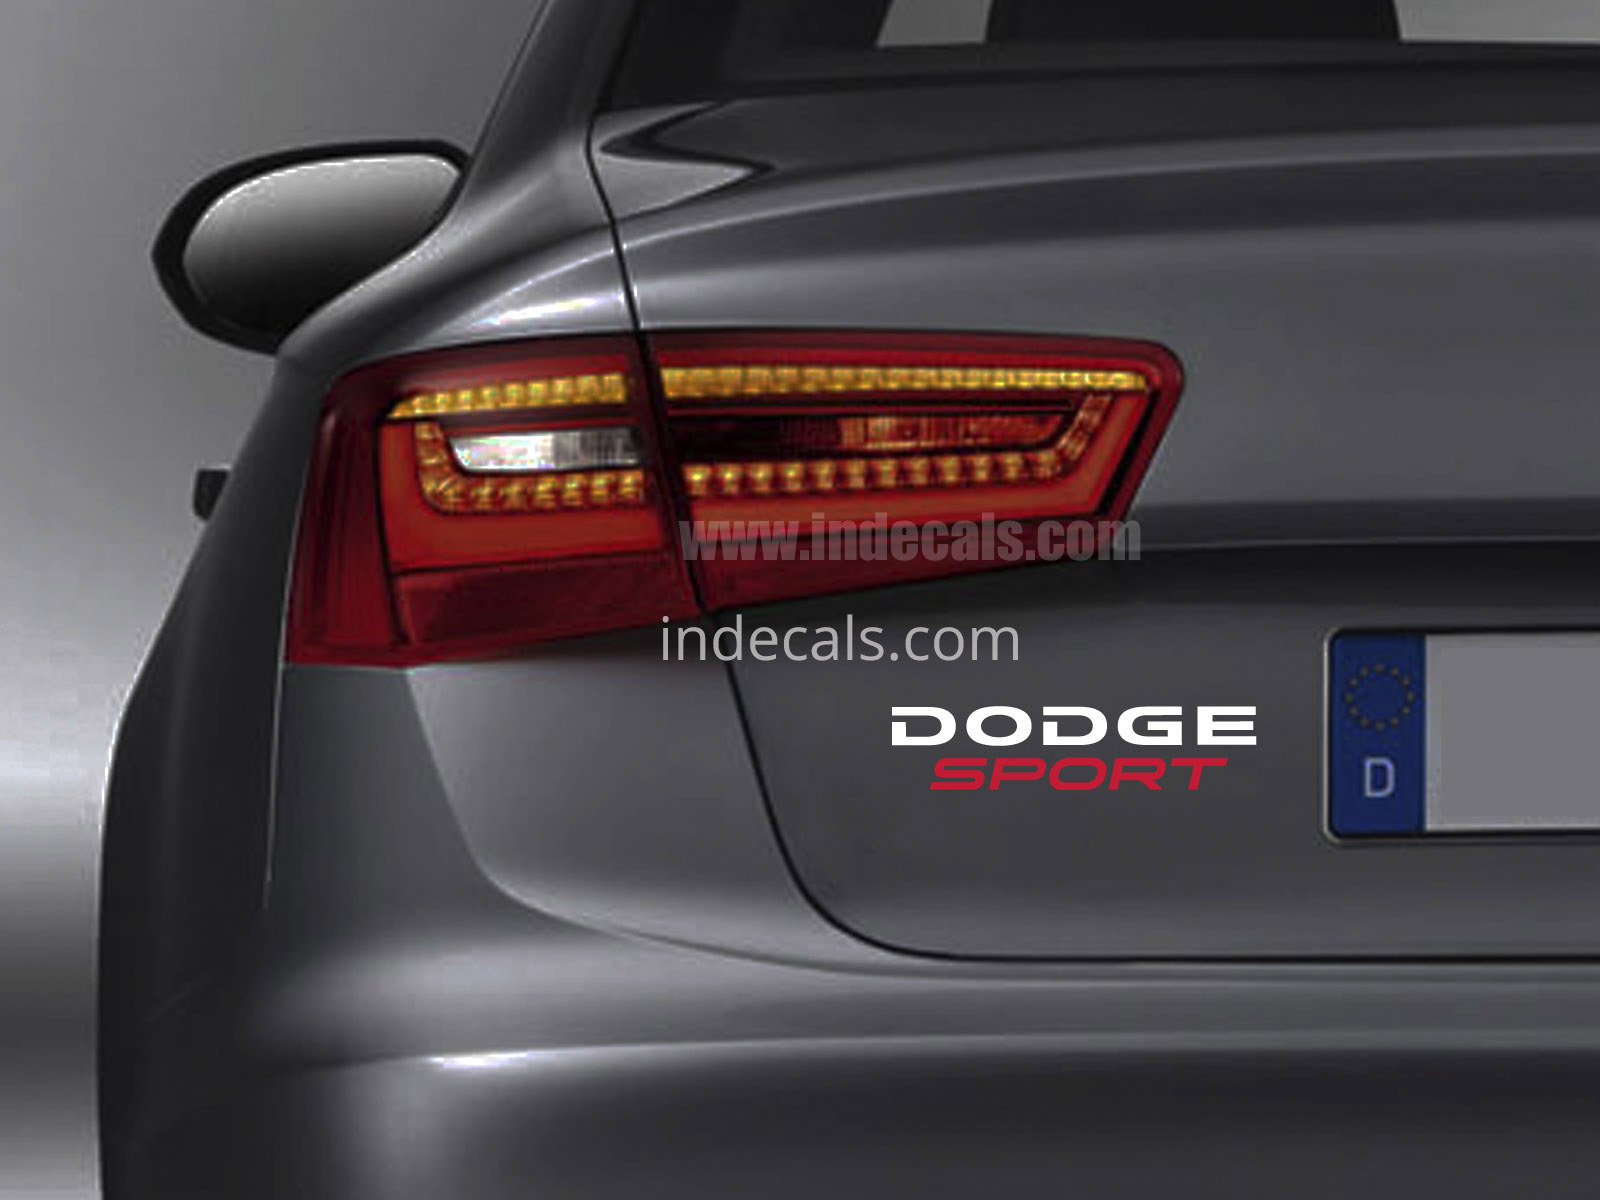 1 x Dodge Sports Sticker for Trunk - White & Red